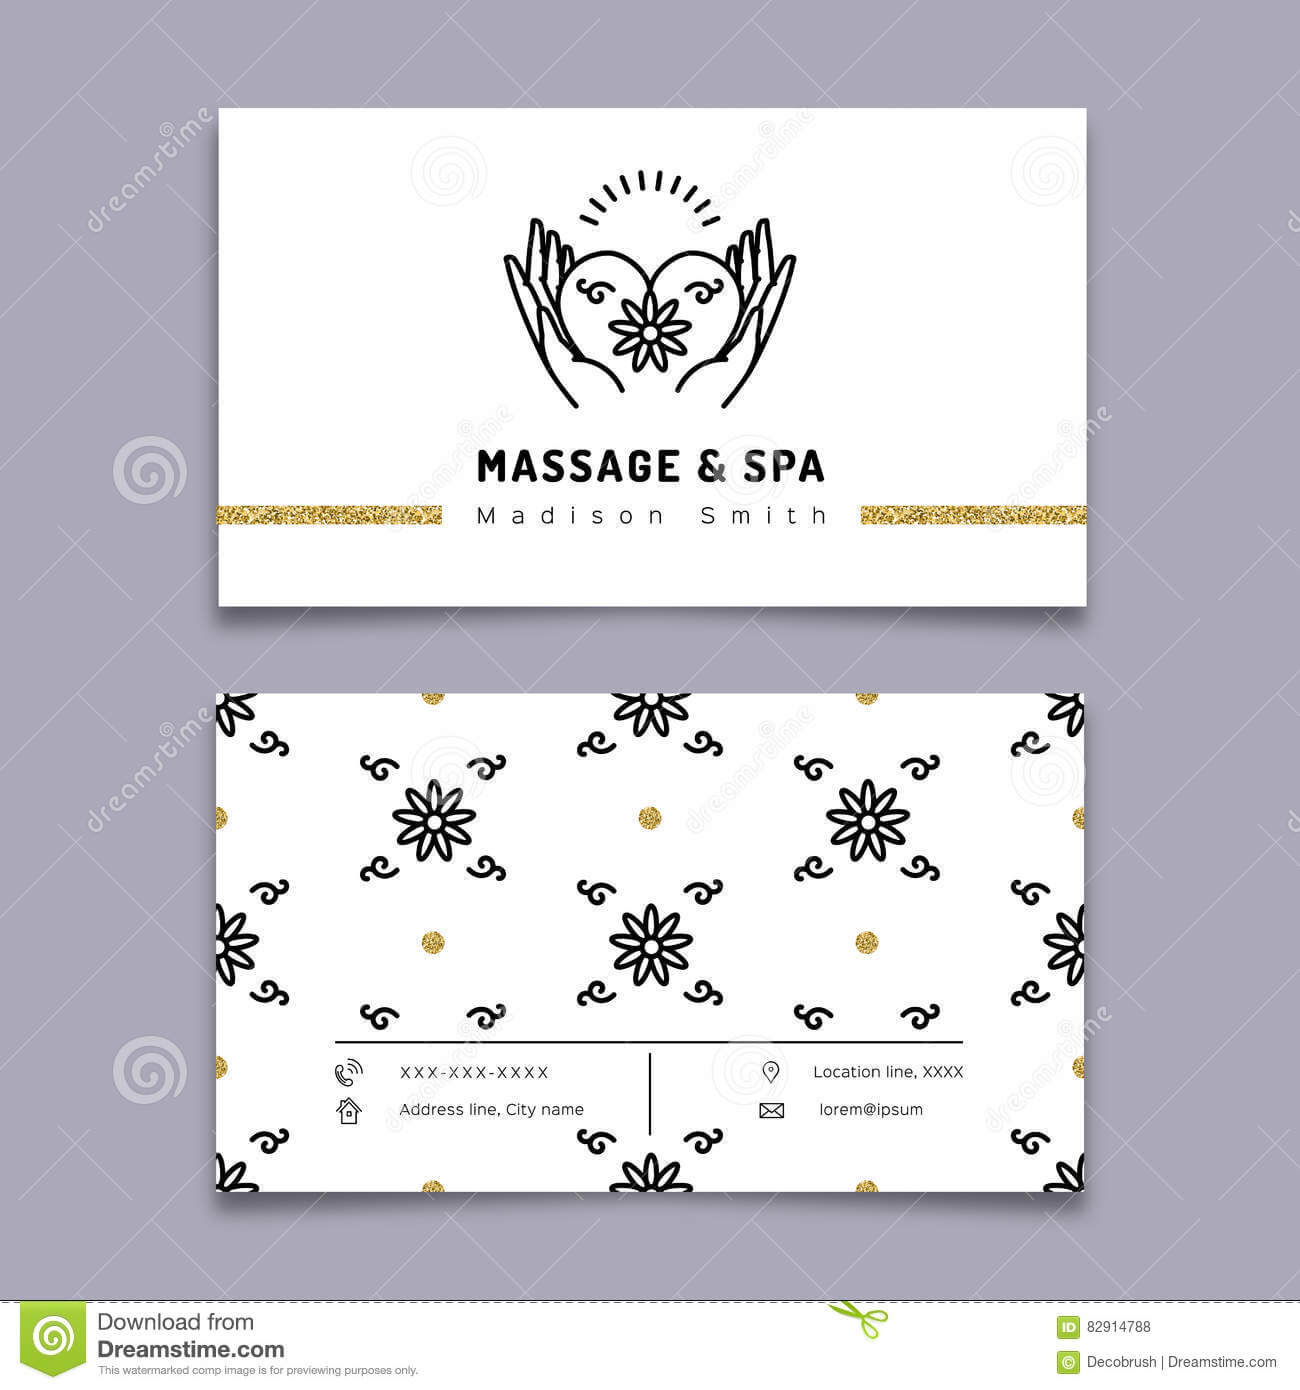 Massage And Spa Therapy Business Card Template, Trendy Line Regarding Massage Therapy Business Card Templates